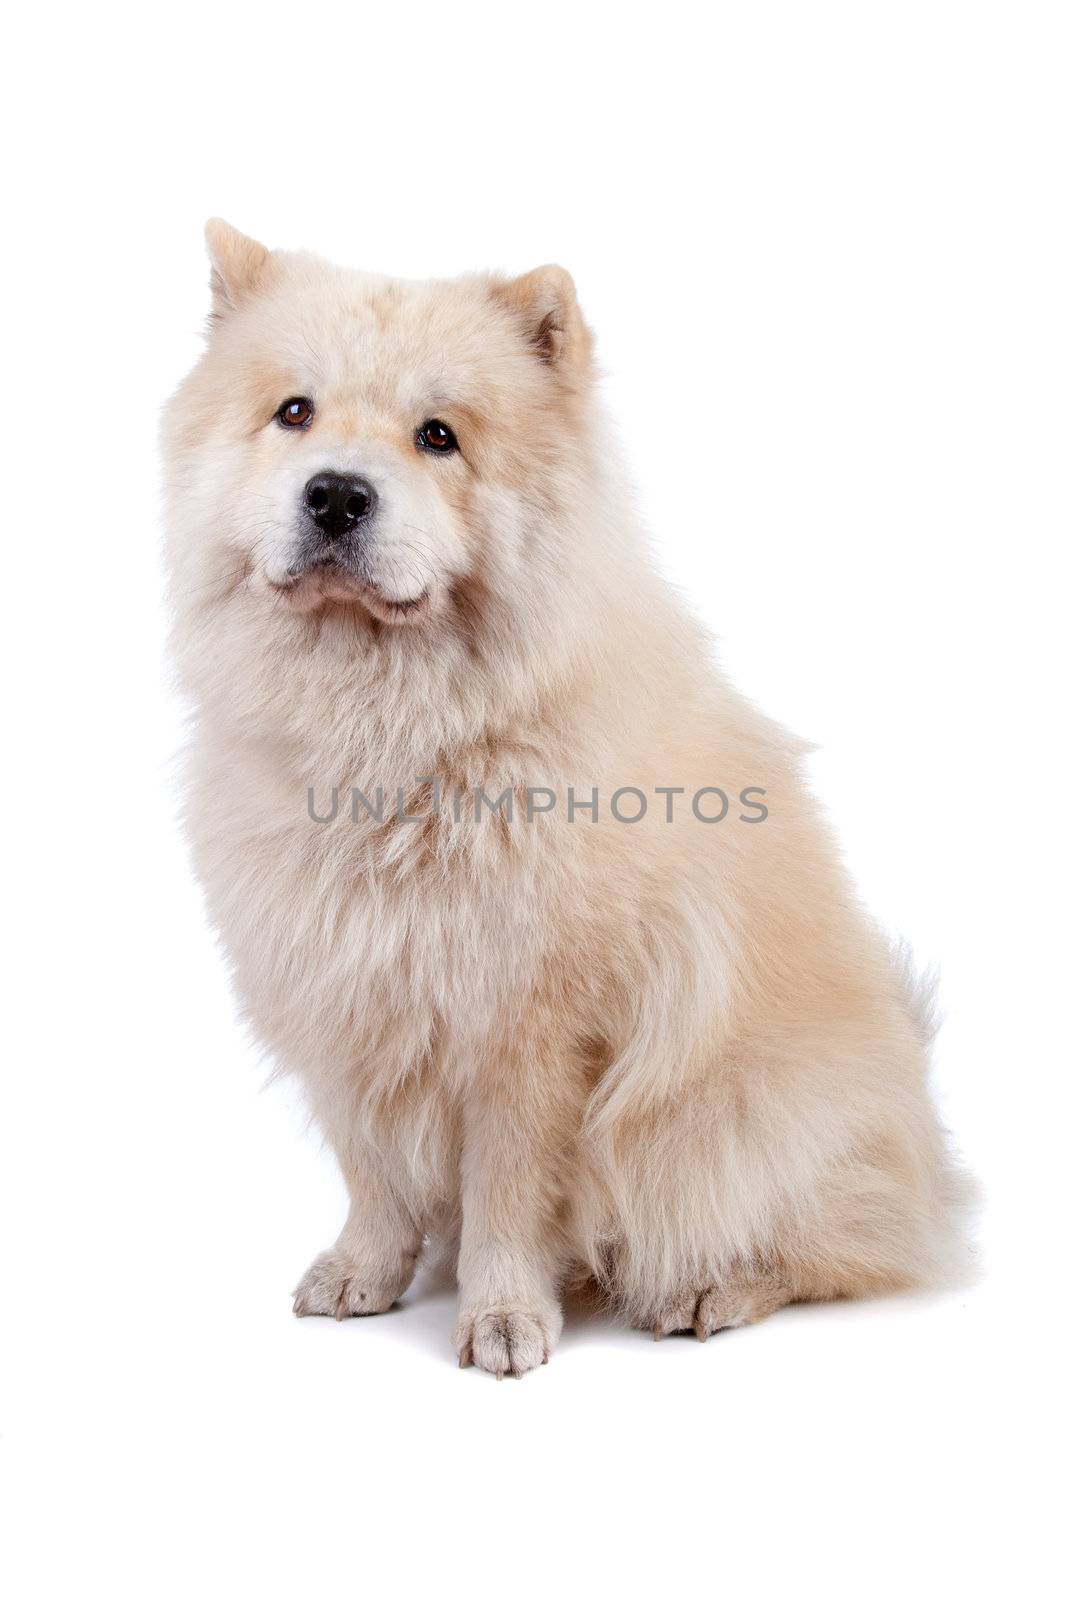 Cute mixed breed dog Chow-Chow and Samoyed sitting, isolated on a white background